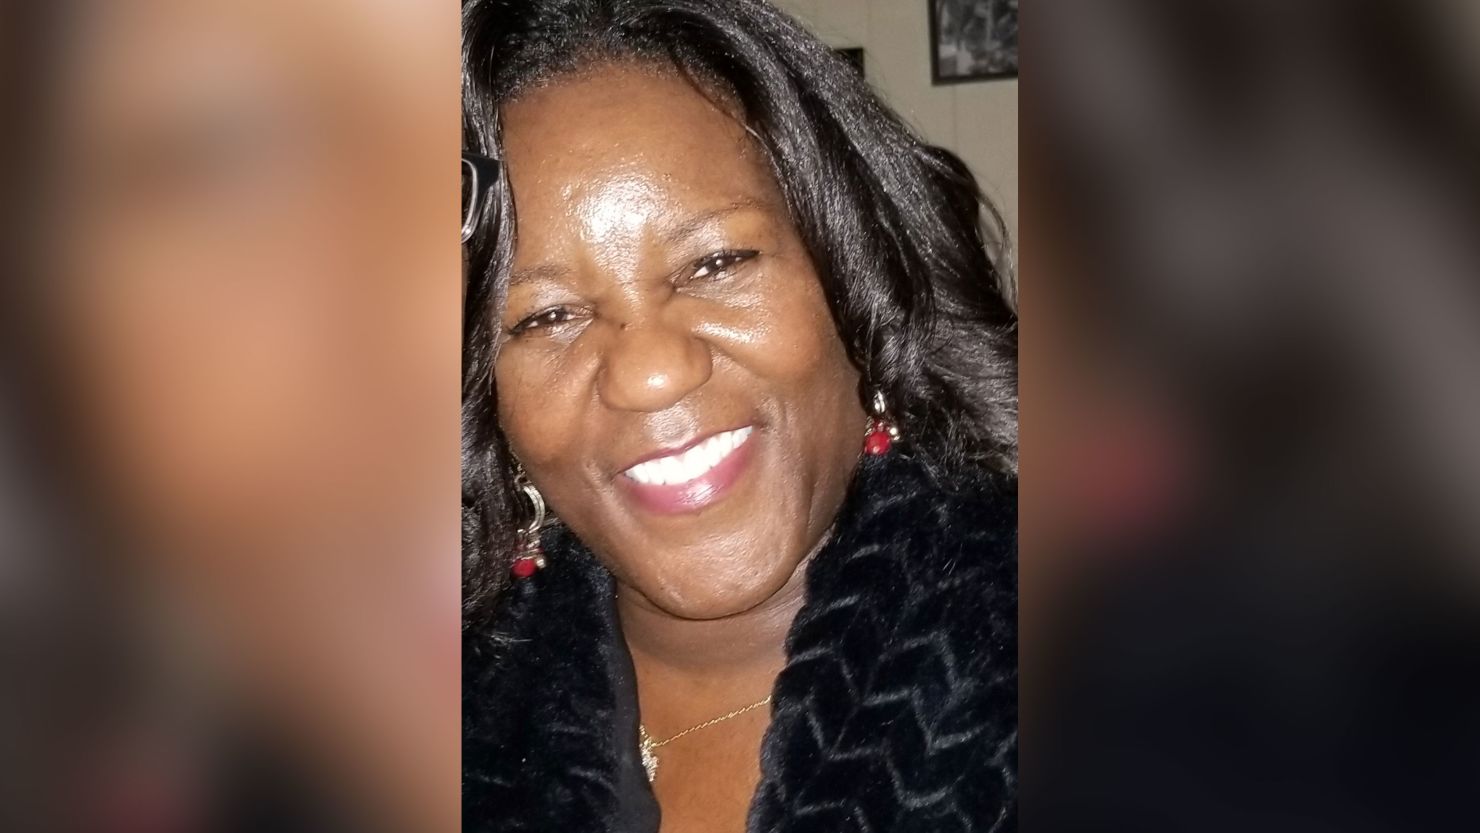 Jacquelyn Smith died after being stabbed in December 2018.